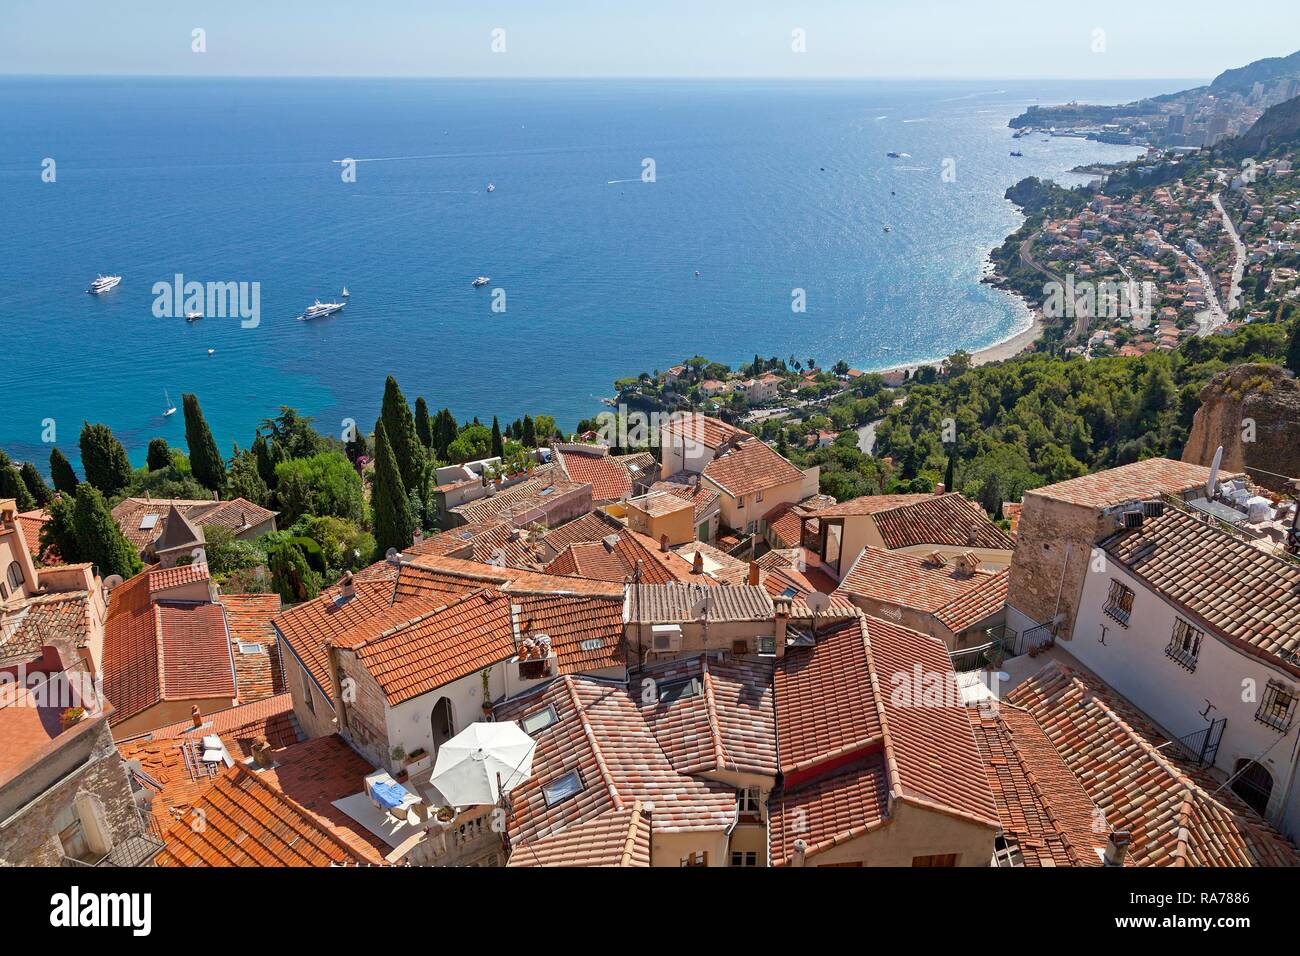 Roofs of the old town, Roquebrune, Cote d'Azur, France Stock Photo